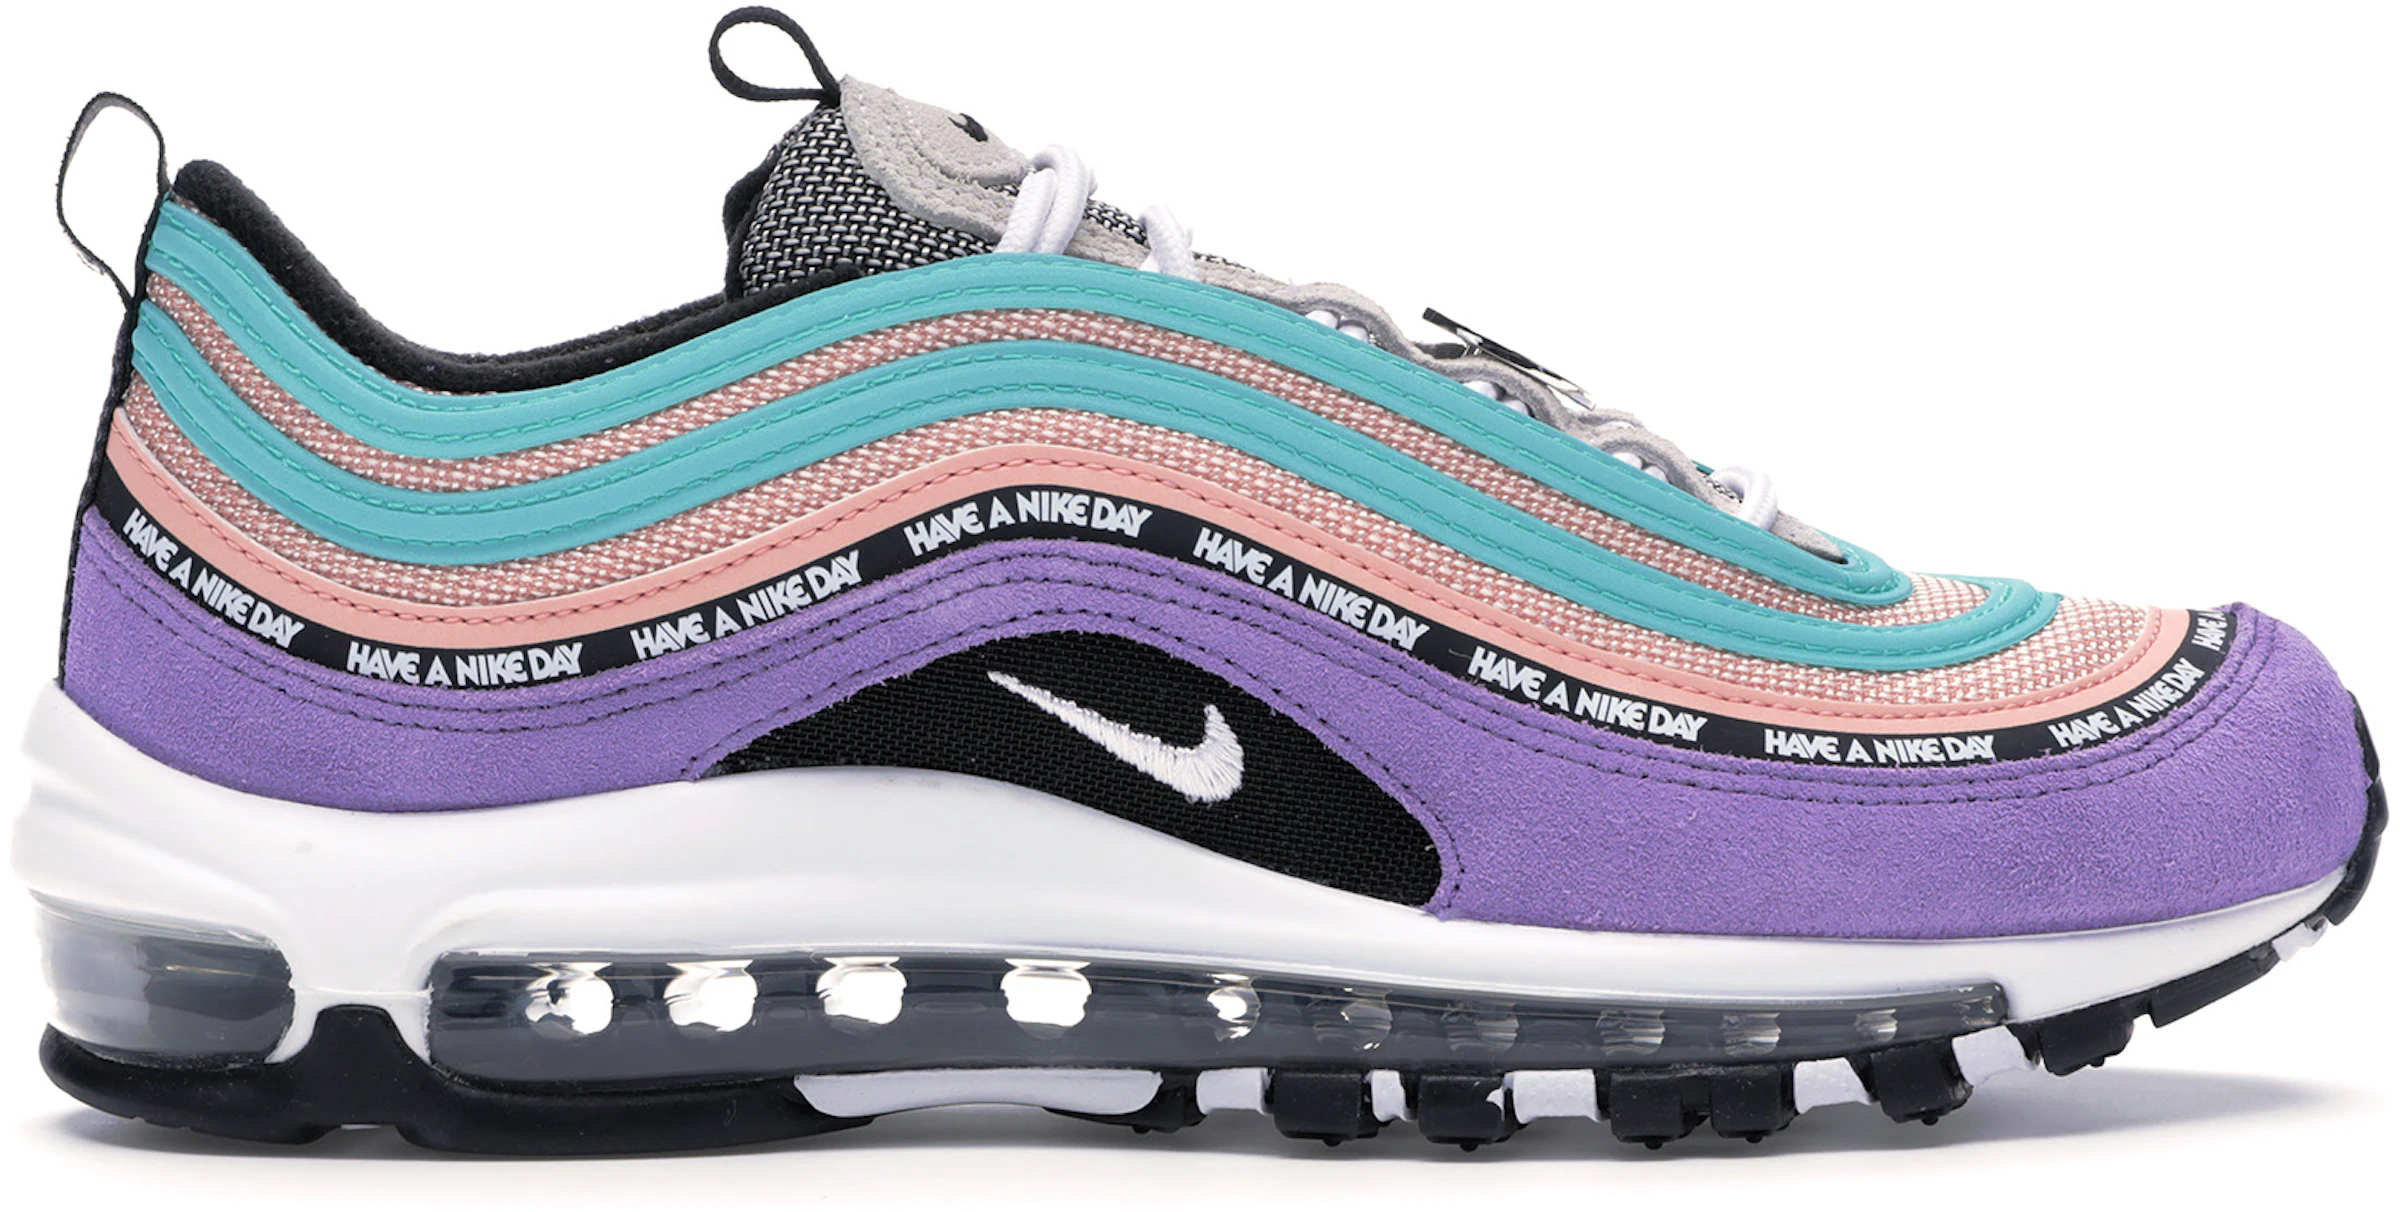 Nike Max 97 Have a Nike Day (GS) -